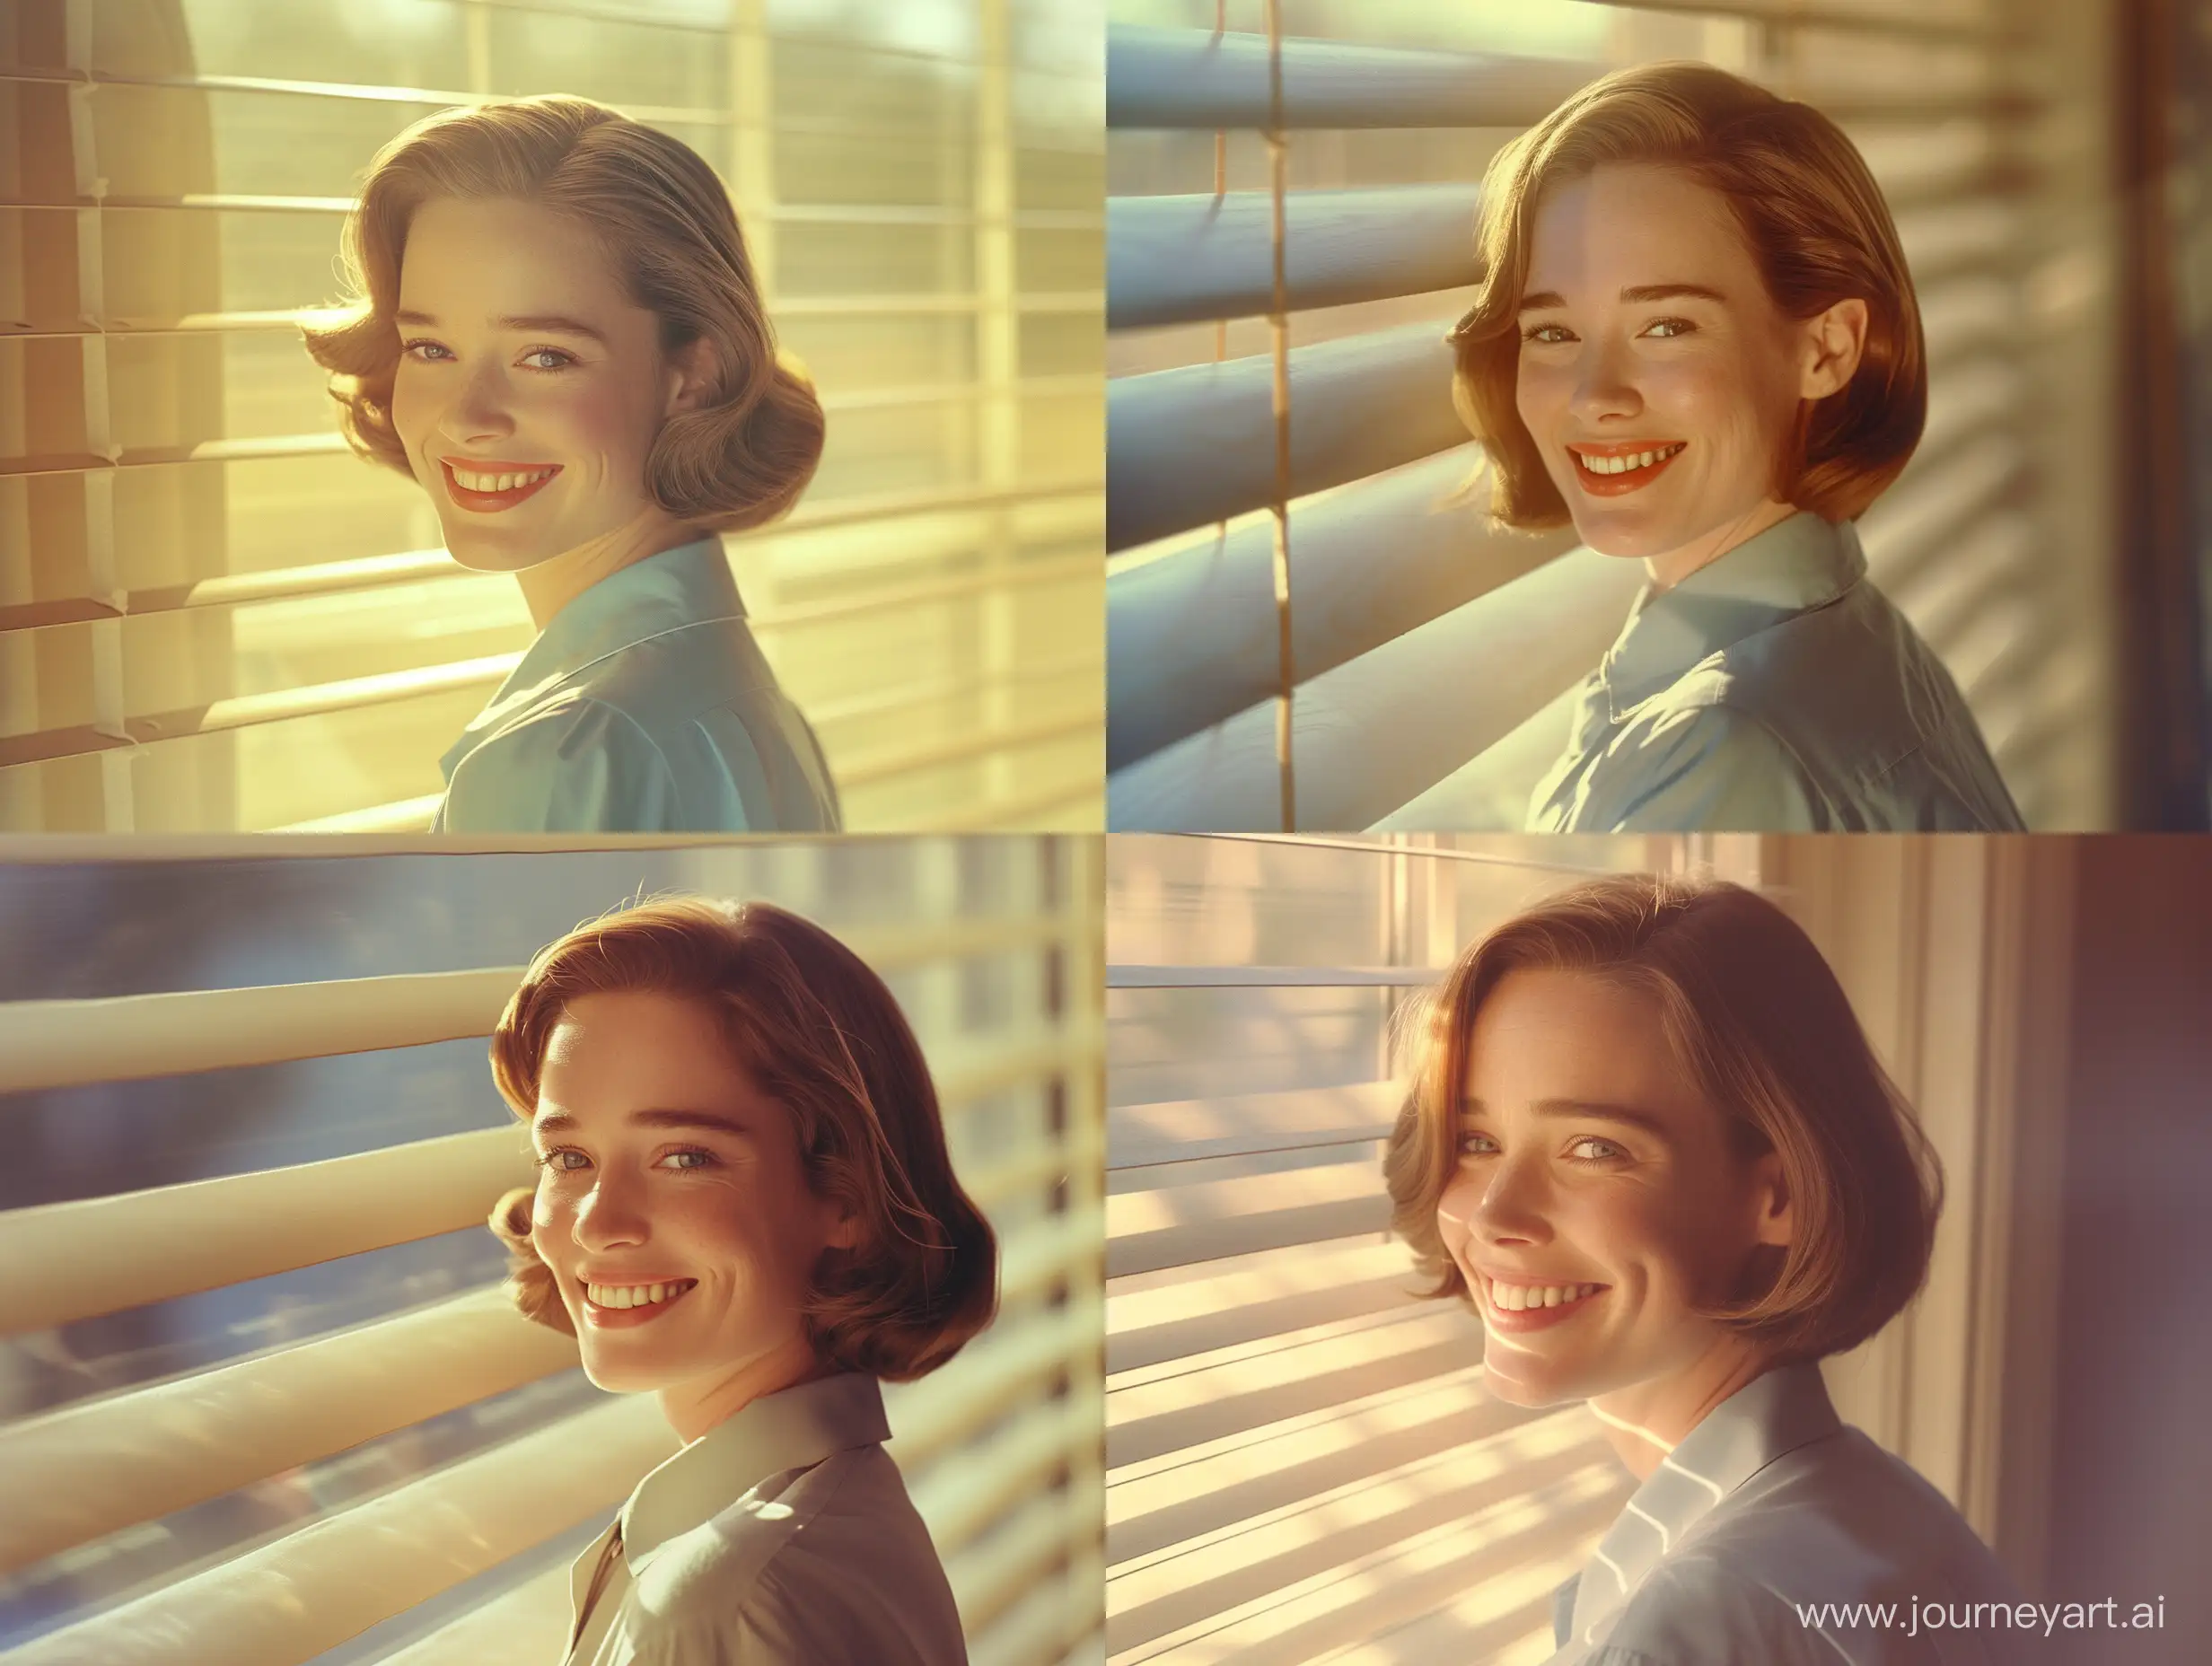 a young Emily Blunt in a 1950s portrait, hair pulled back, bob shoulder length haircut, smiling, collared shirt, award winning photo, Style: Analog Film, morning sunlight through blinds, smooth light